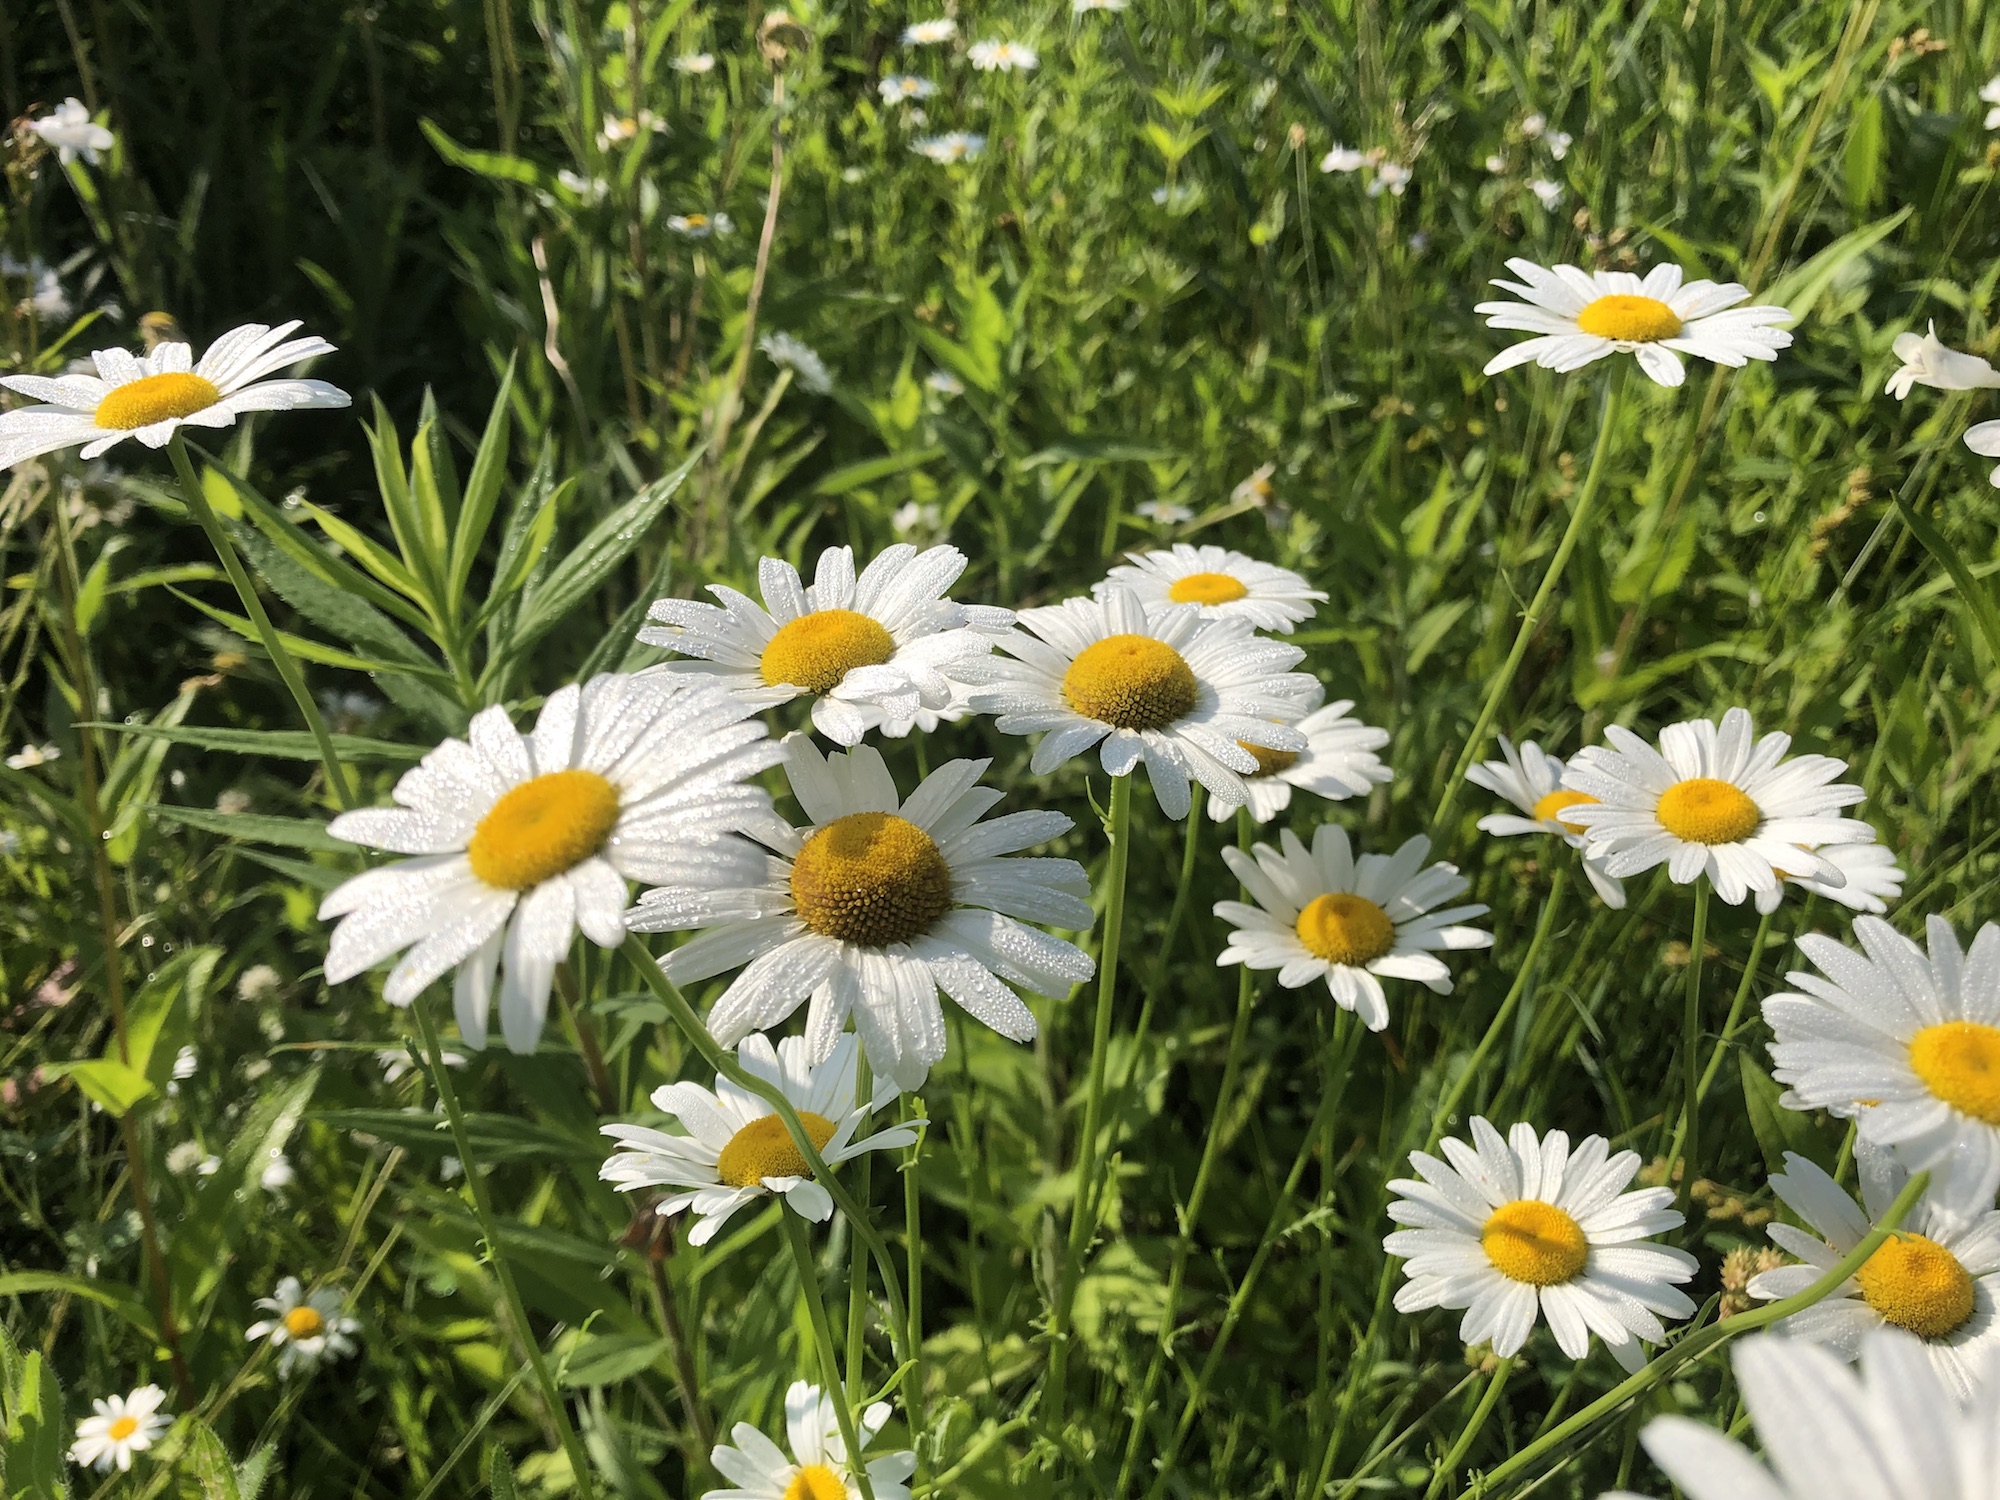 Ox-eye Daisies on bank of retaining pond at the corner of Manitou Way and Nakoma Road in Madison, Wisconsin on June 29, 2019.